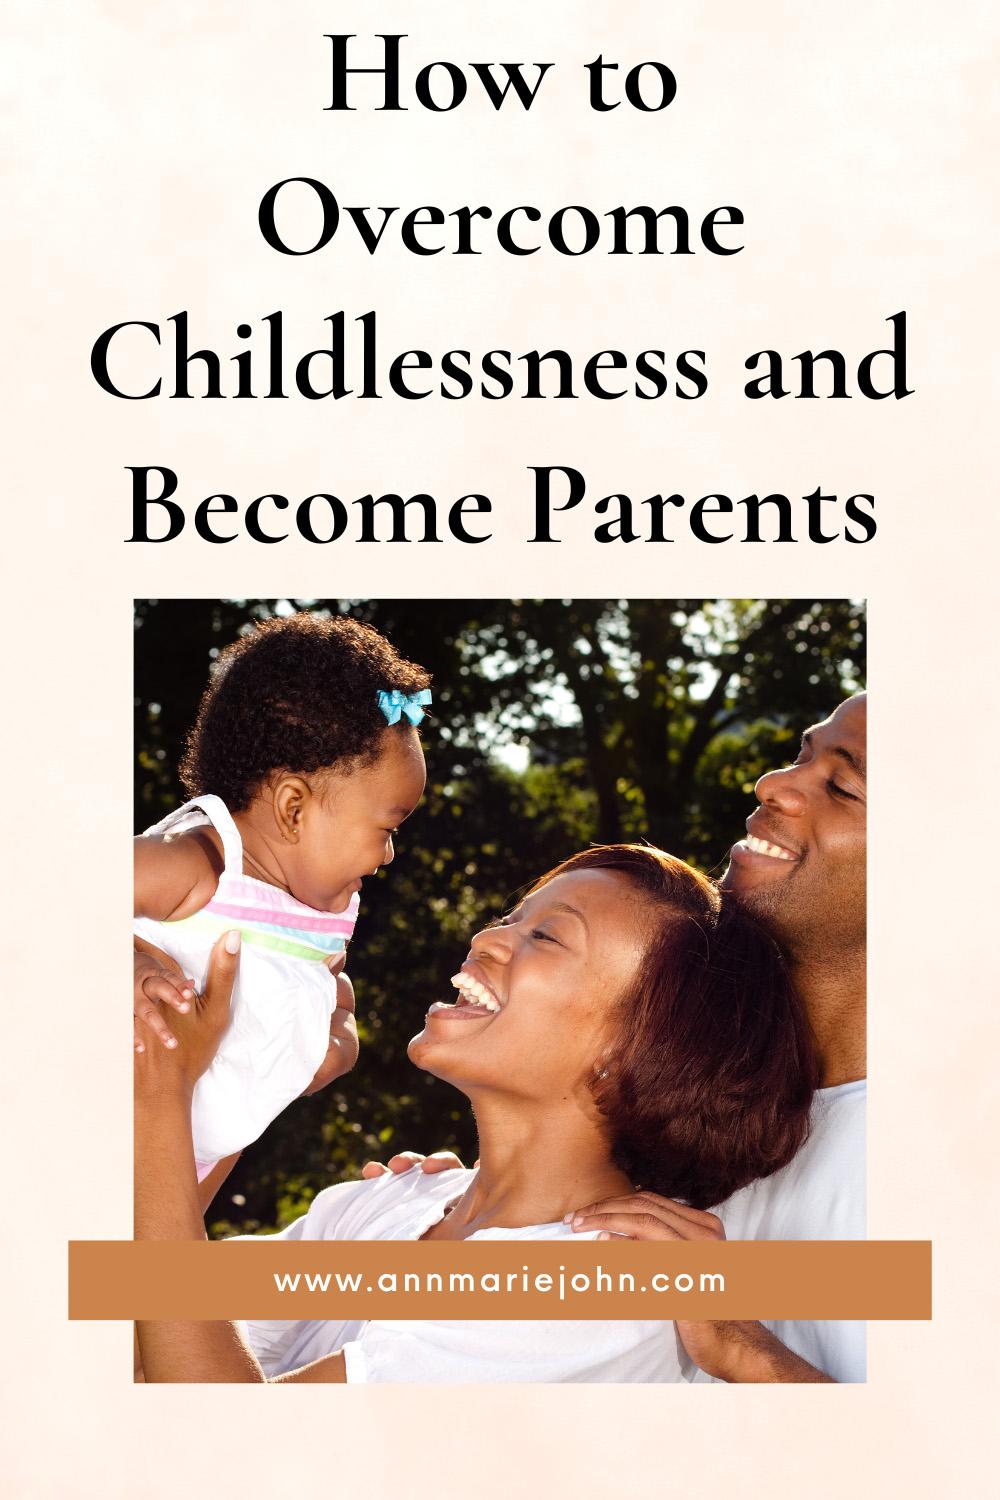 How to Overcome Childlessness and Become Parents